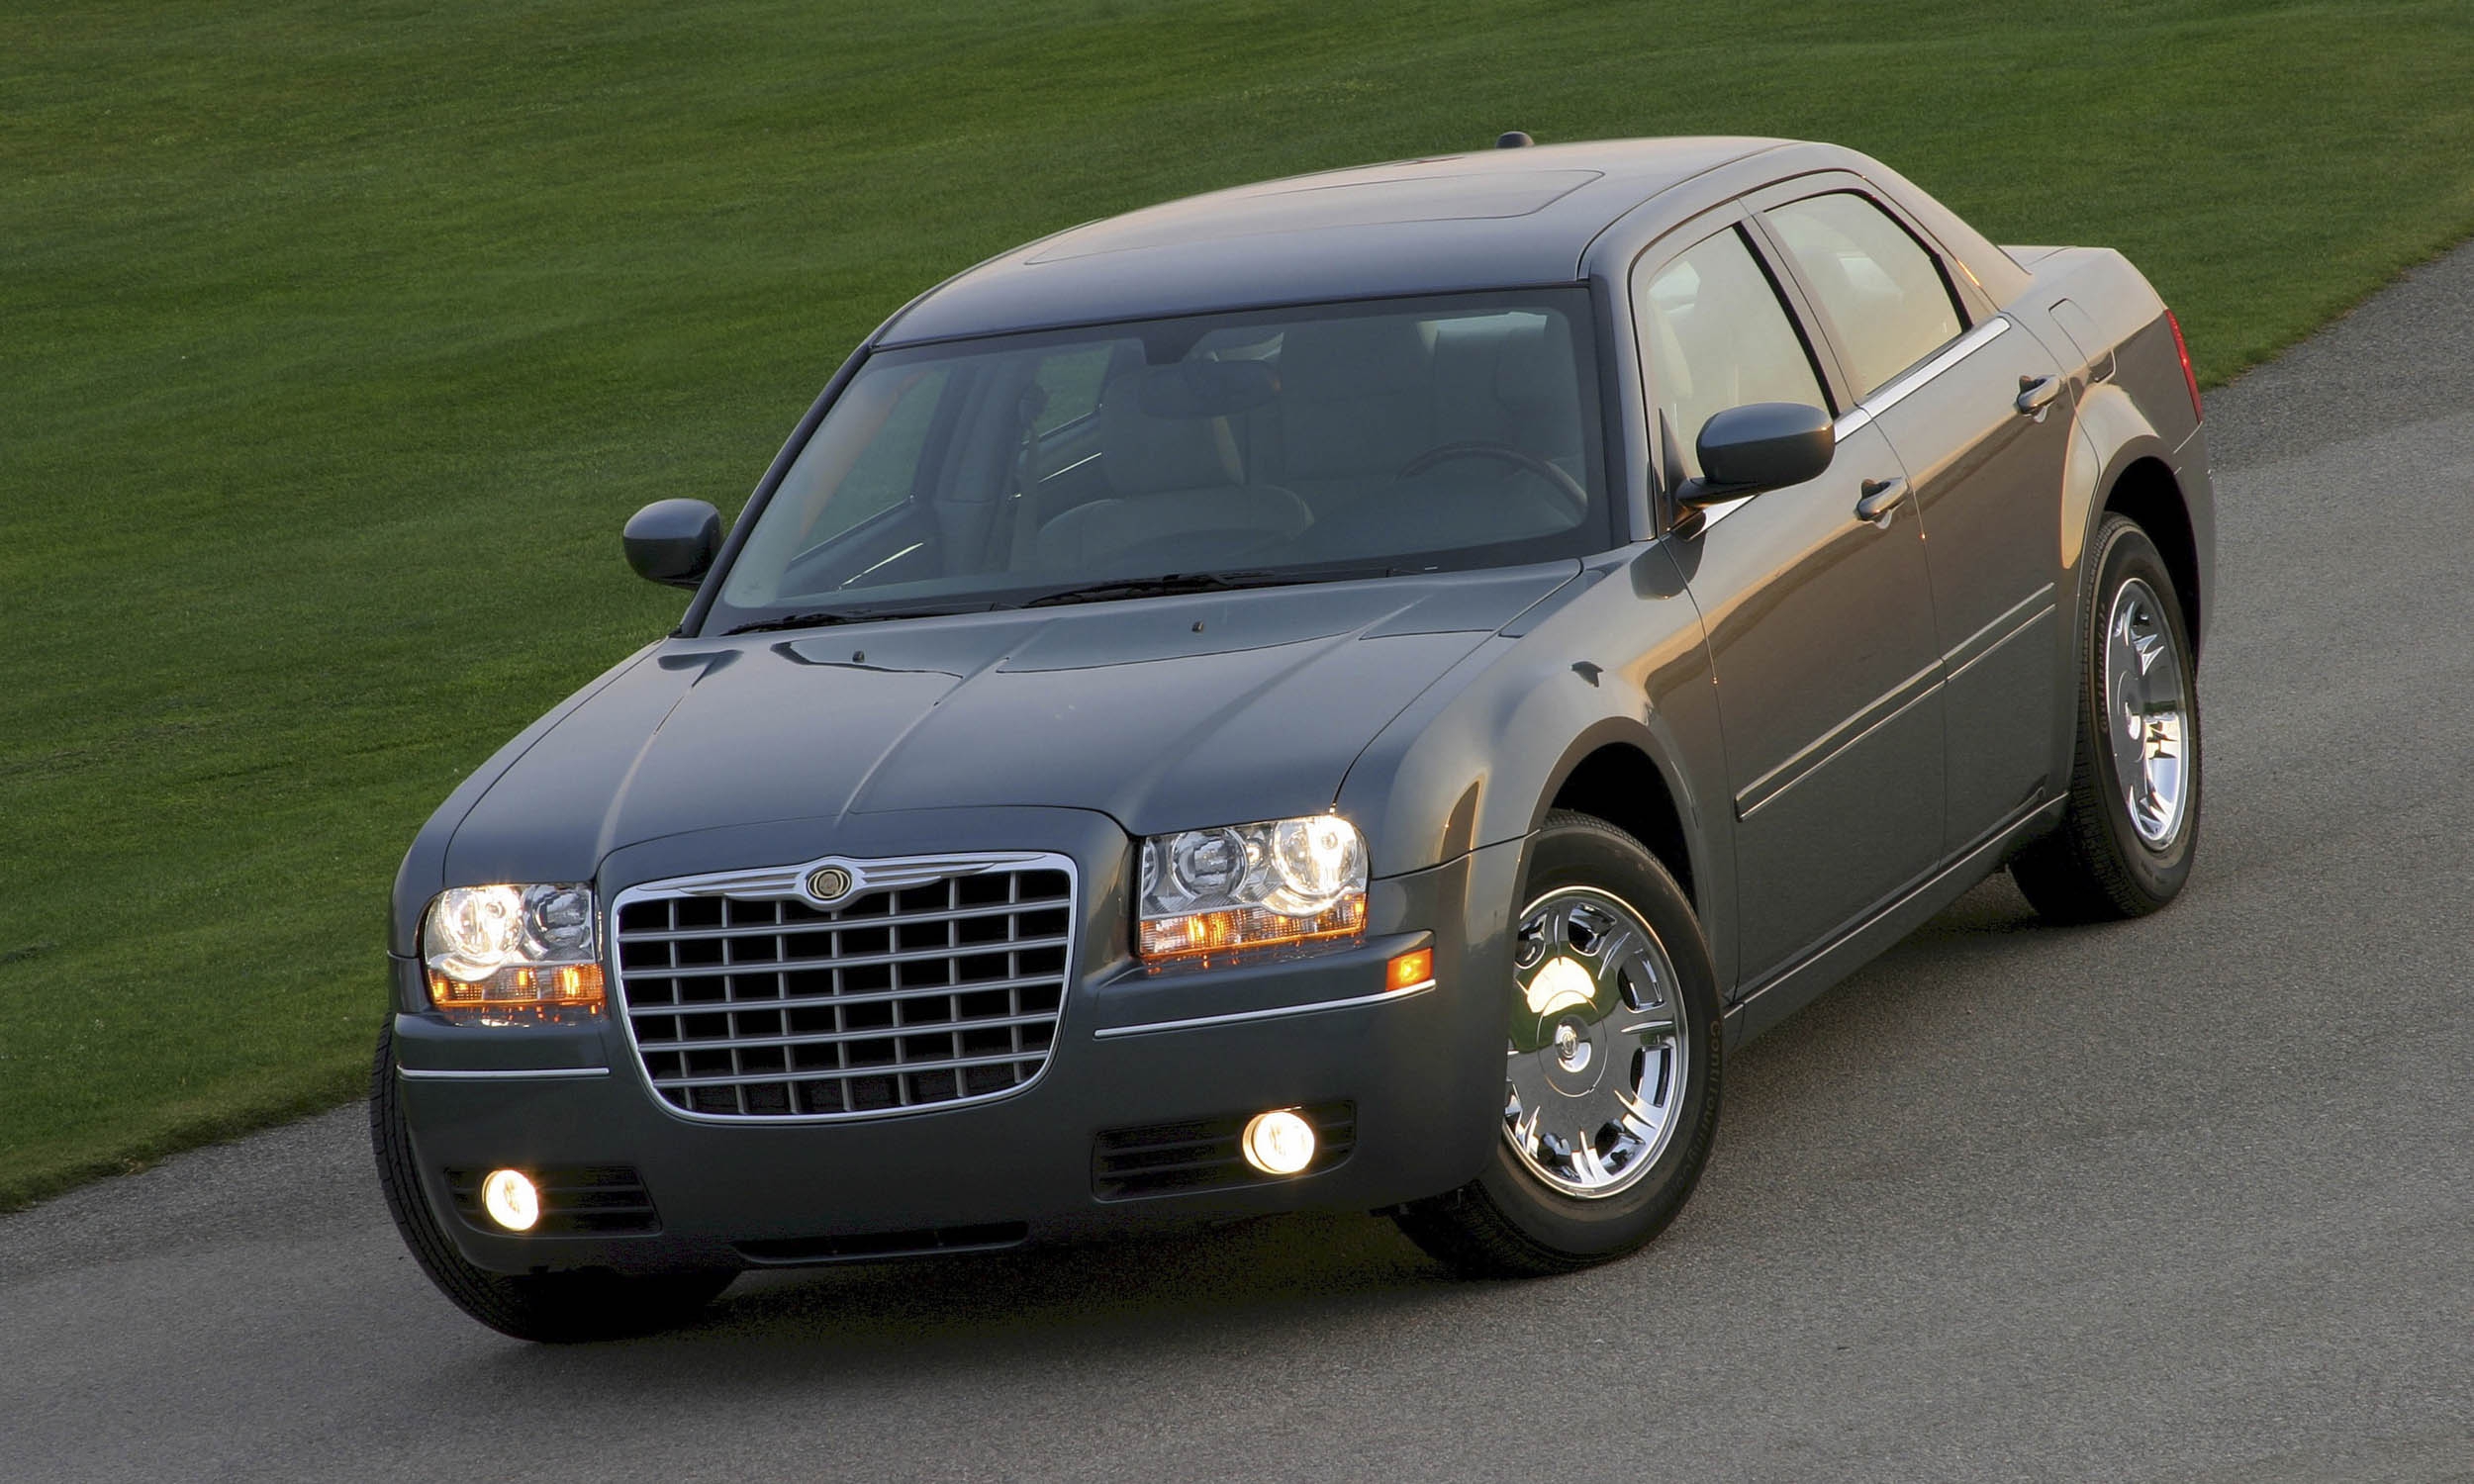 Chrysler 300 Wallpapers Images Photos Pictures Backgrounds
